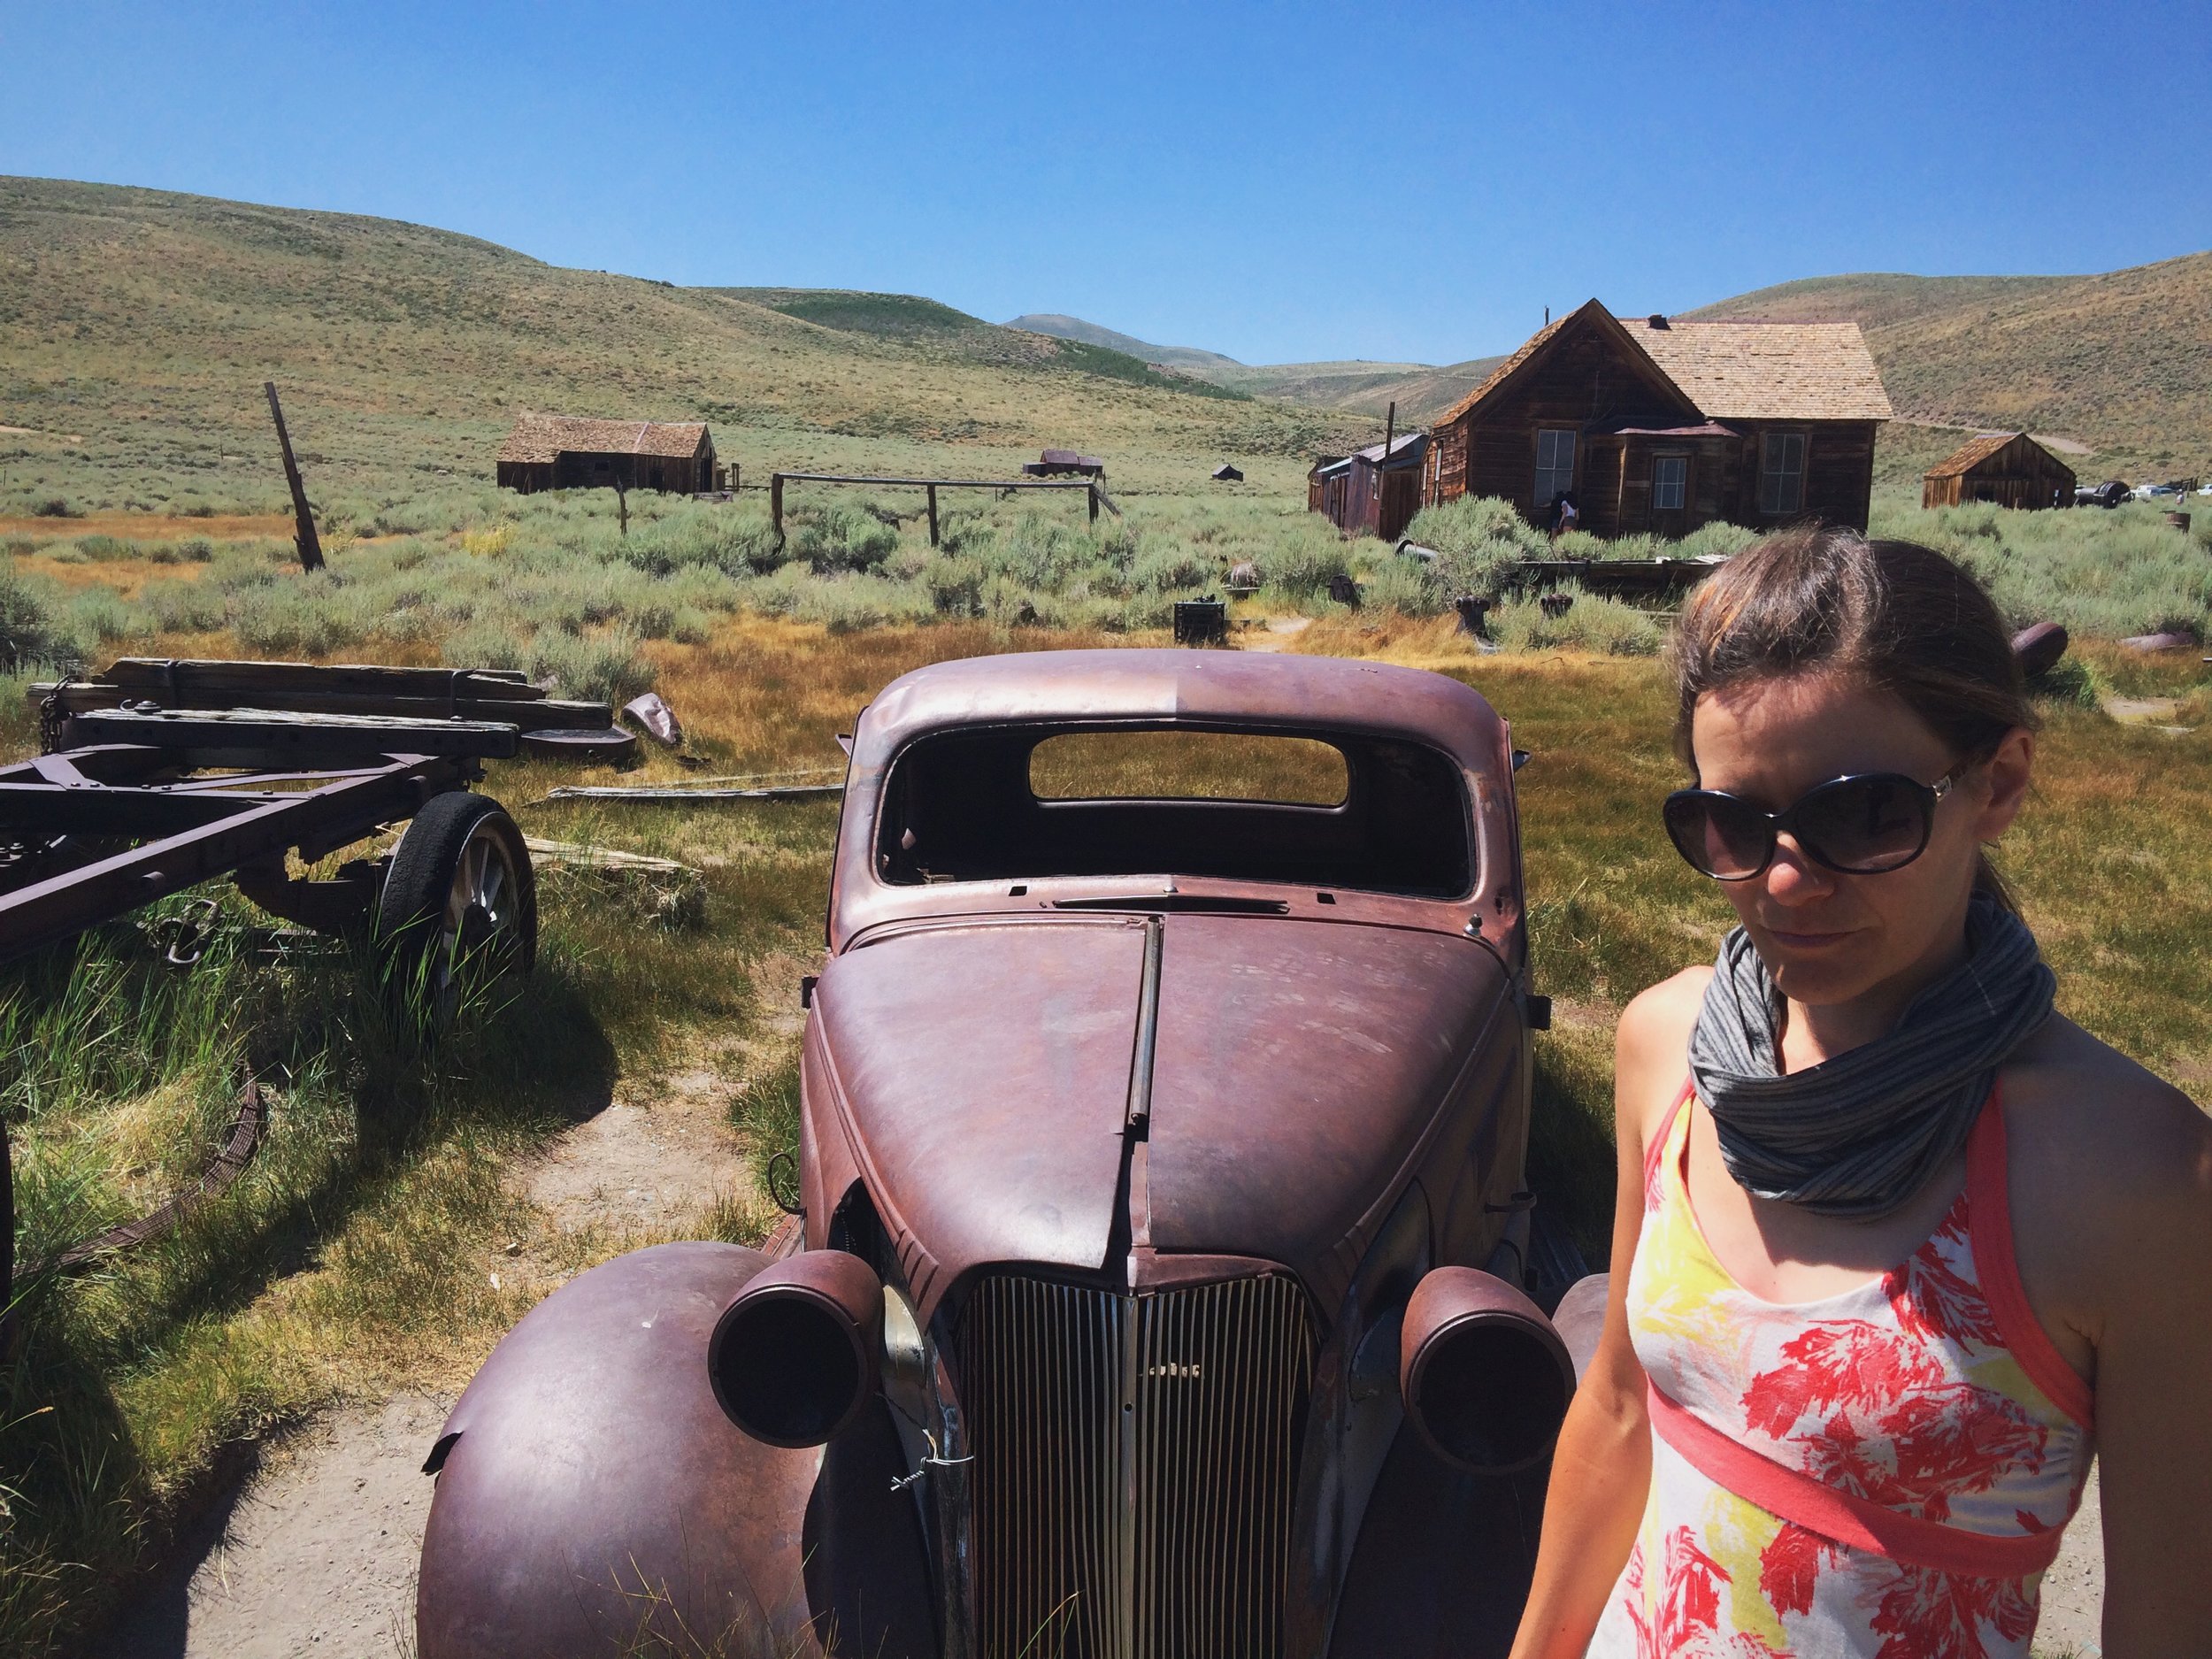  Day-after-hike shenanigans at Bodie State Historic Park 